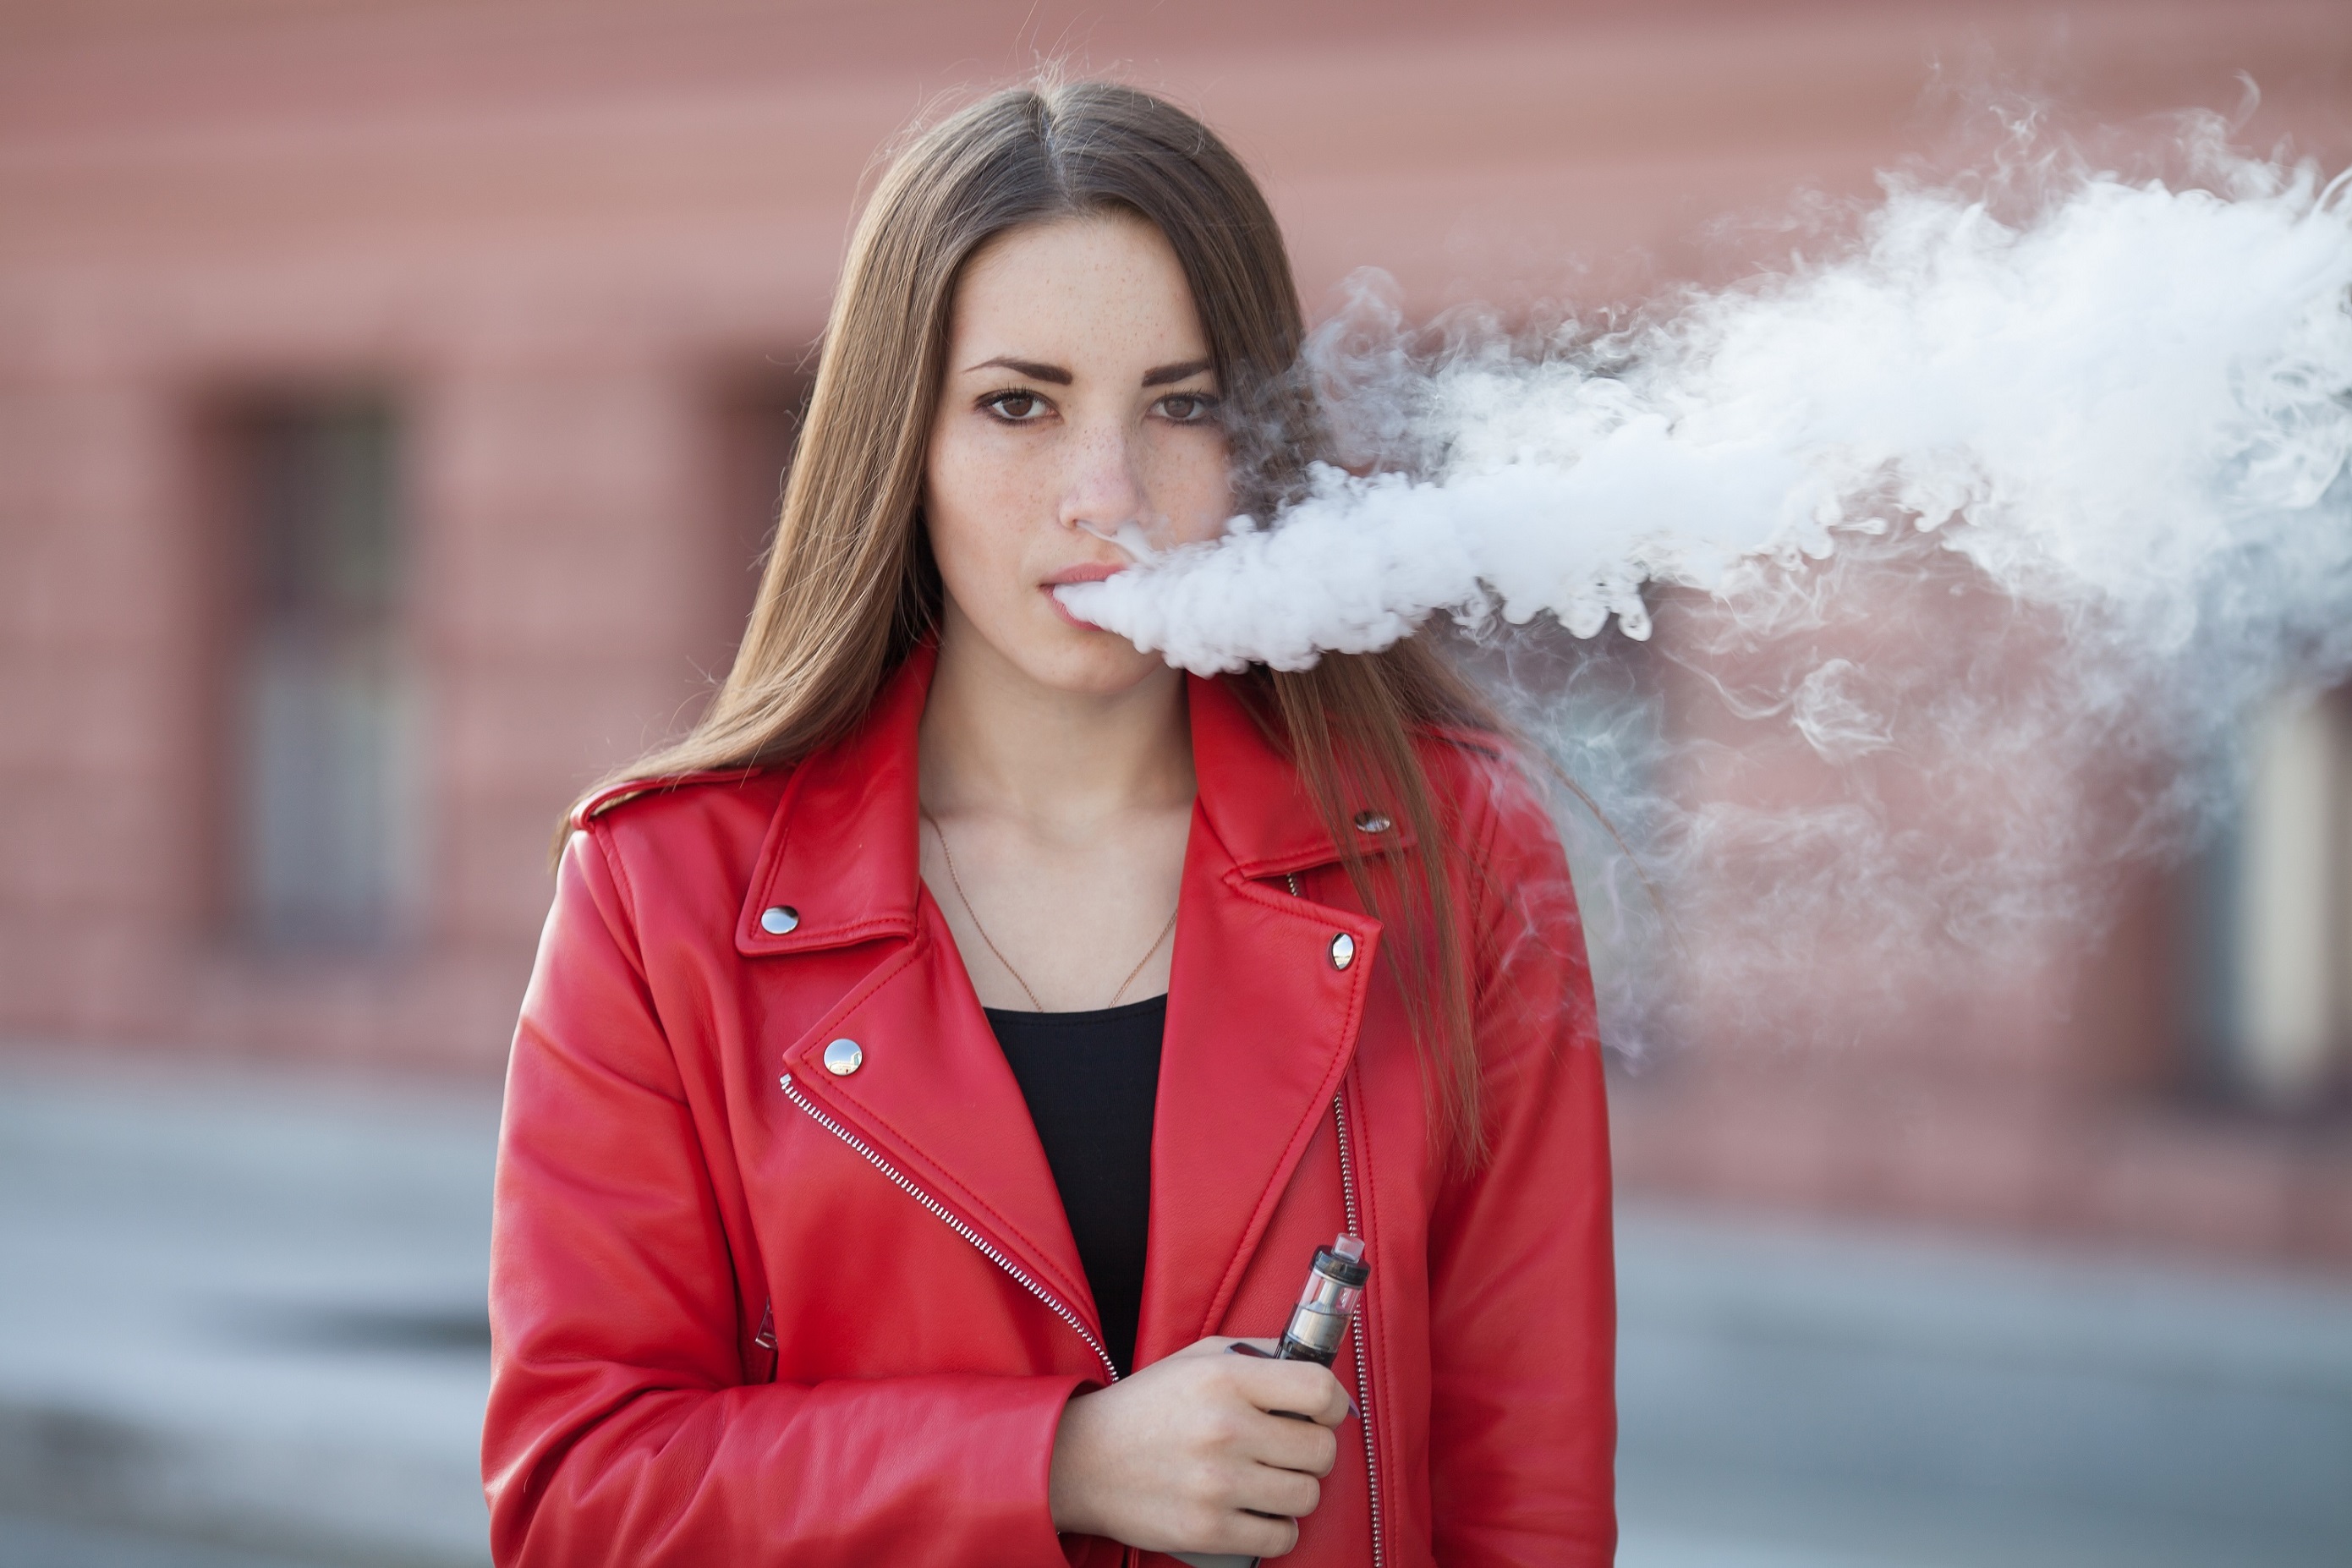 vaping model photo outdoor red jacette